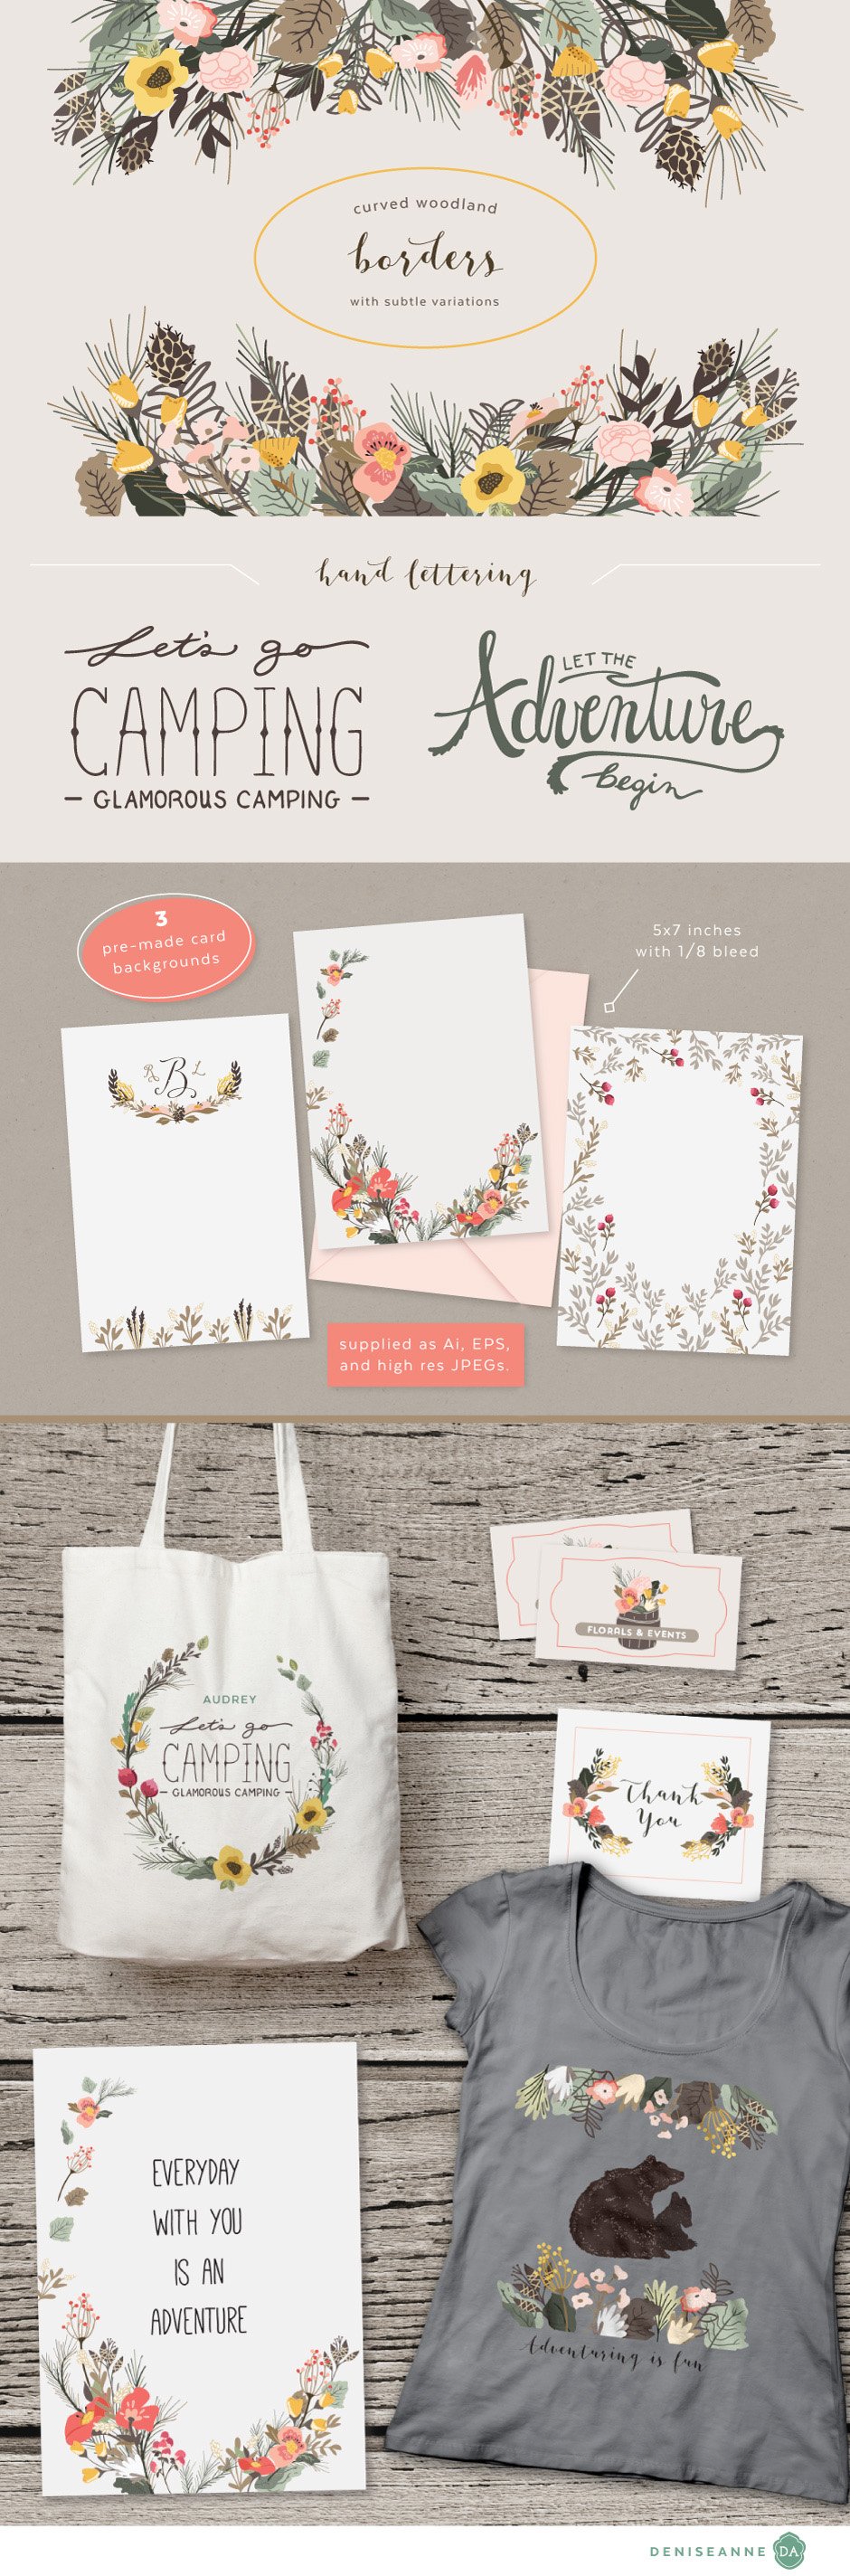 Woodland Florals Thicket Thatch Pack